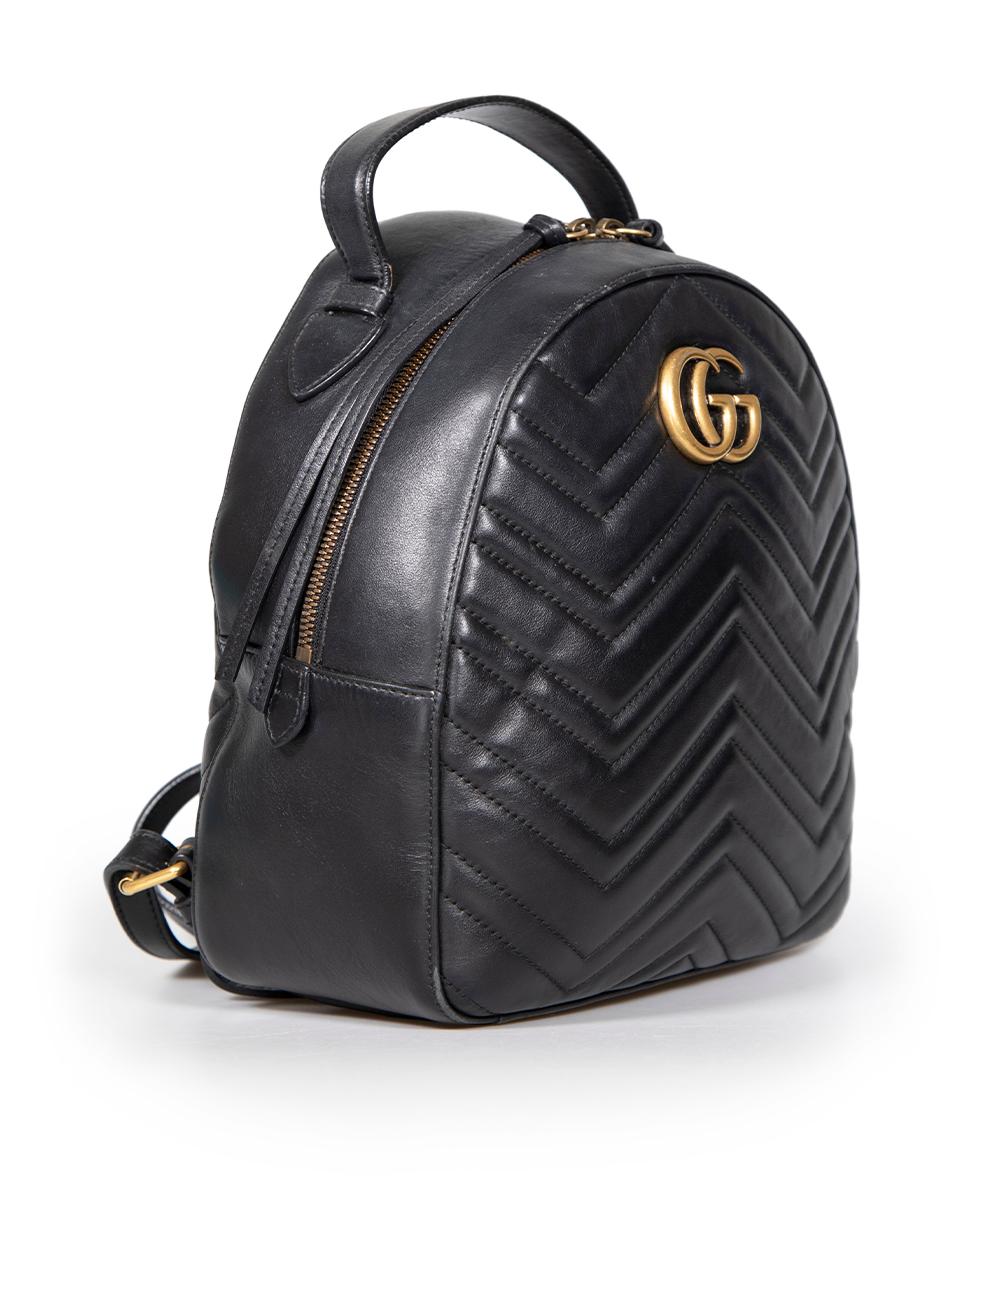 CONDITION is Very good. Minimal wear to backpack is evident. Minimal wear to the front, trim and base with abrasions to the leather. The GG logo plaque also has a small tarnish mark to the metal on this used Gucci designer resale item. This item